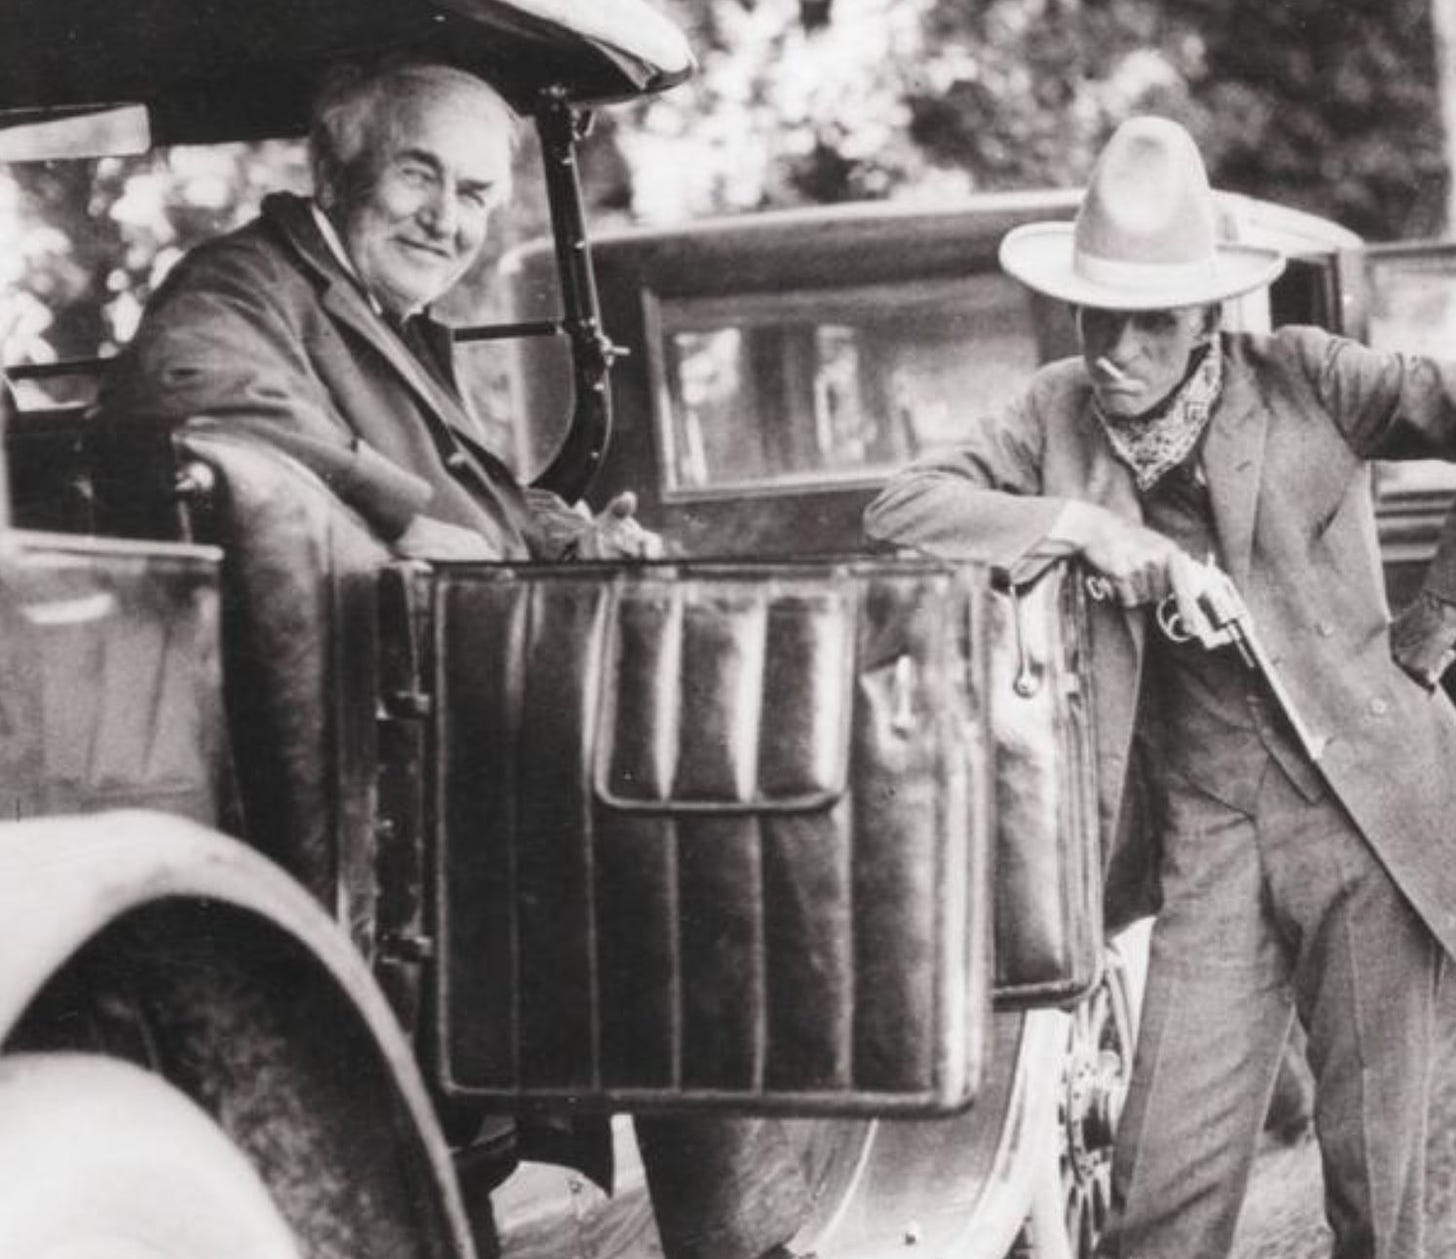 Thomas Edison and Henry Ford. Edison is sitting in the automobile while Ford leans on the door.Getty Images.